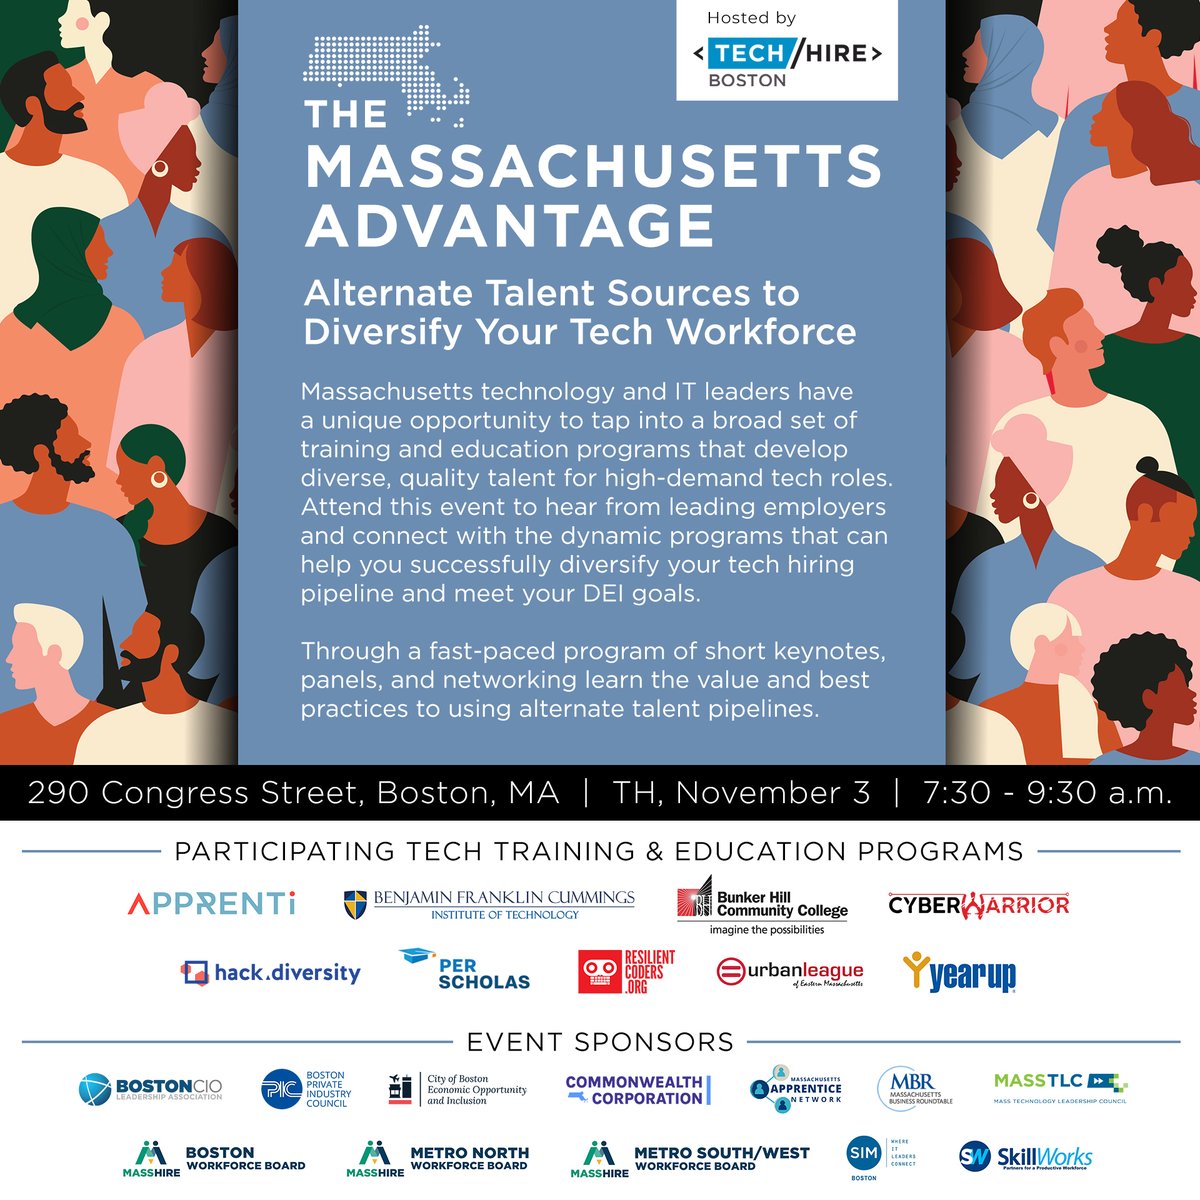 Join us & other @TechhireB partners for #MassAdvantage on TH, Nov. 3, 7:30 - 9:30 a.m. Hear from leading employers & connect with dynamic training programs to help companies diversify their #tech #hiring pipeline & meet critical #DEI goals. Register at tinyurl.com/MAadvantage2022.